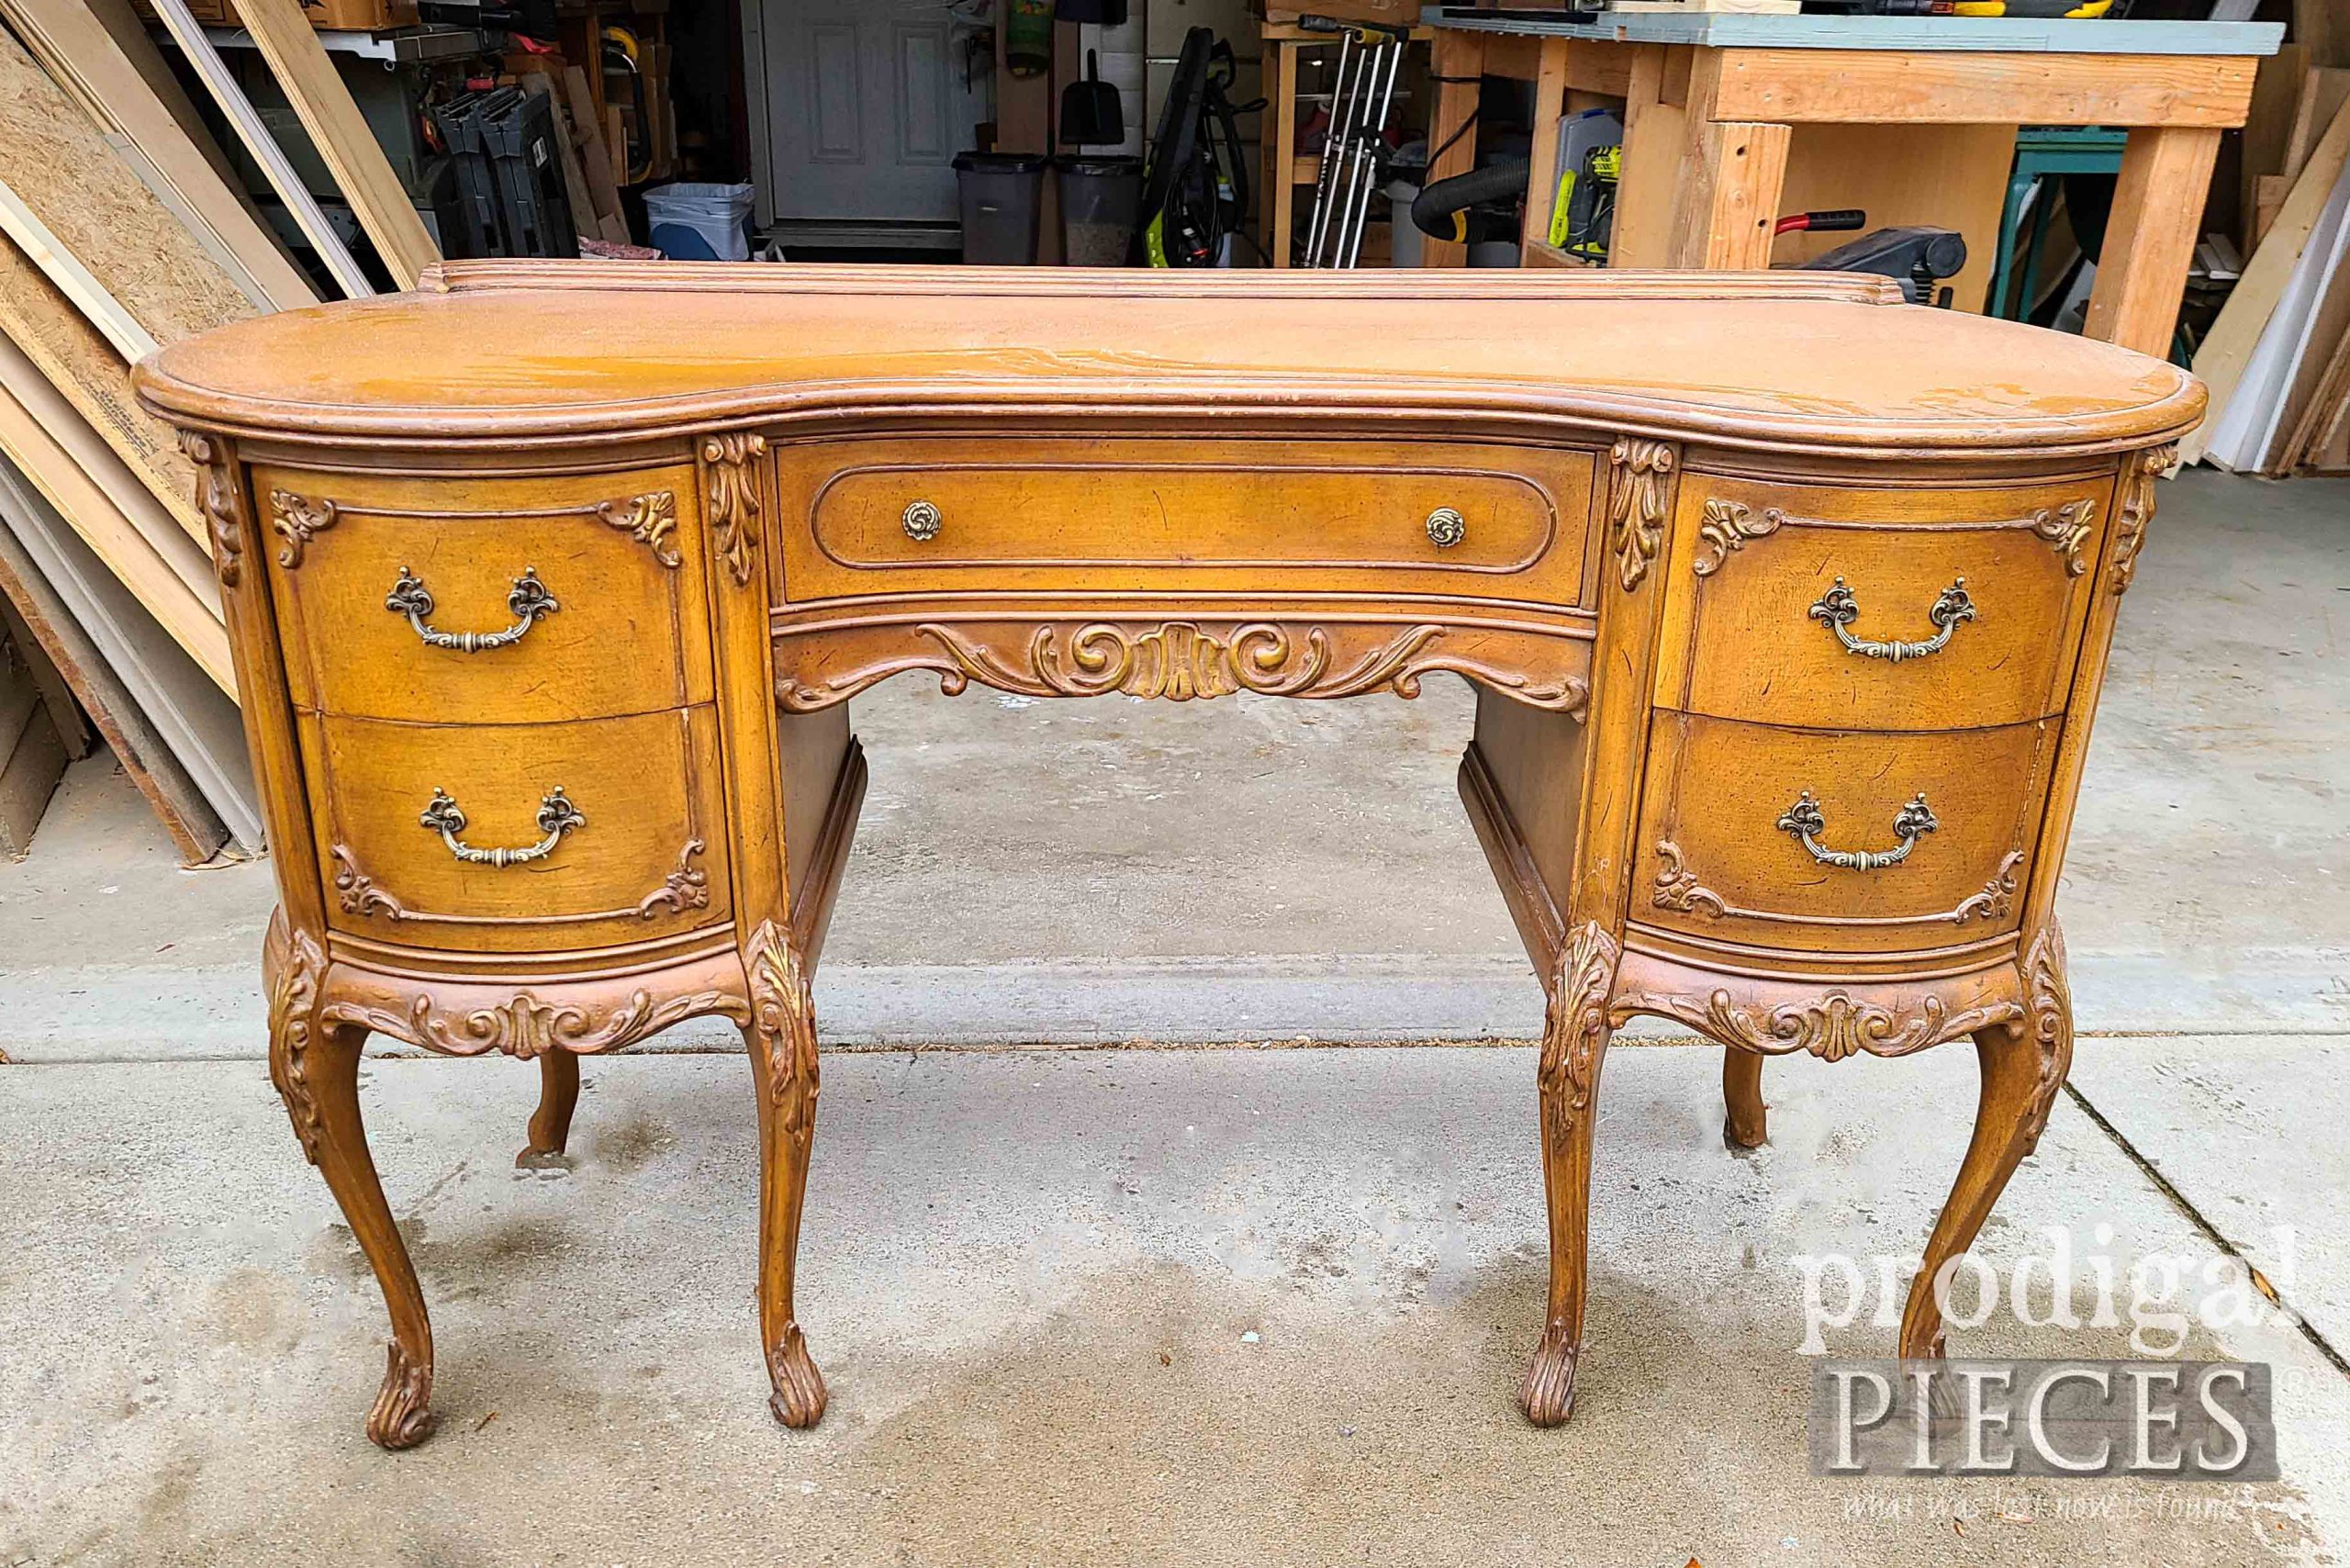 Vintage French Provincial Kidney Desk Before Makeover by Prodigal Pieces | prodigalpieces.com